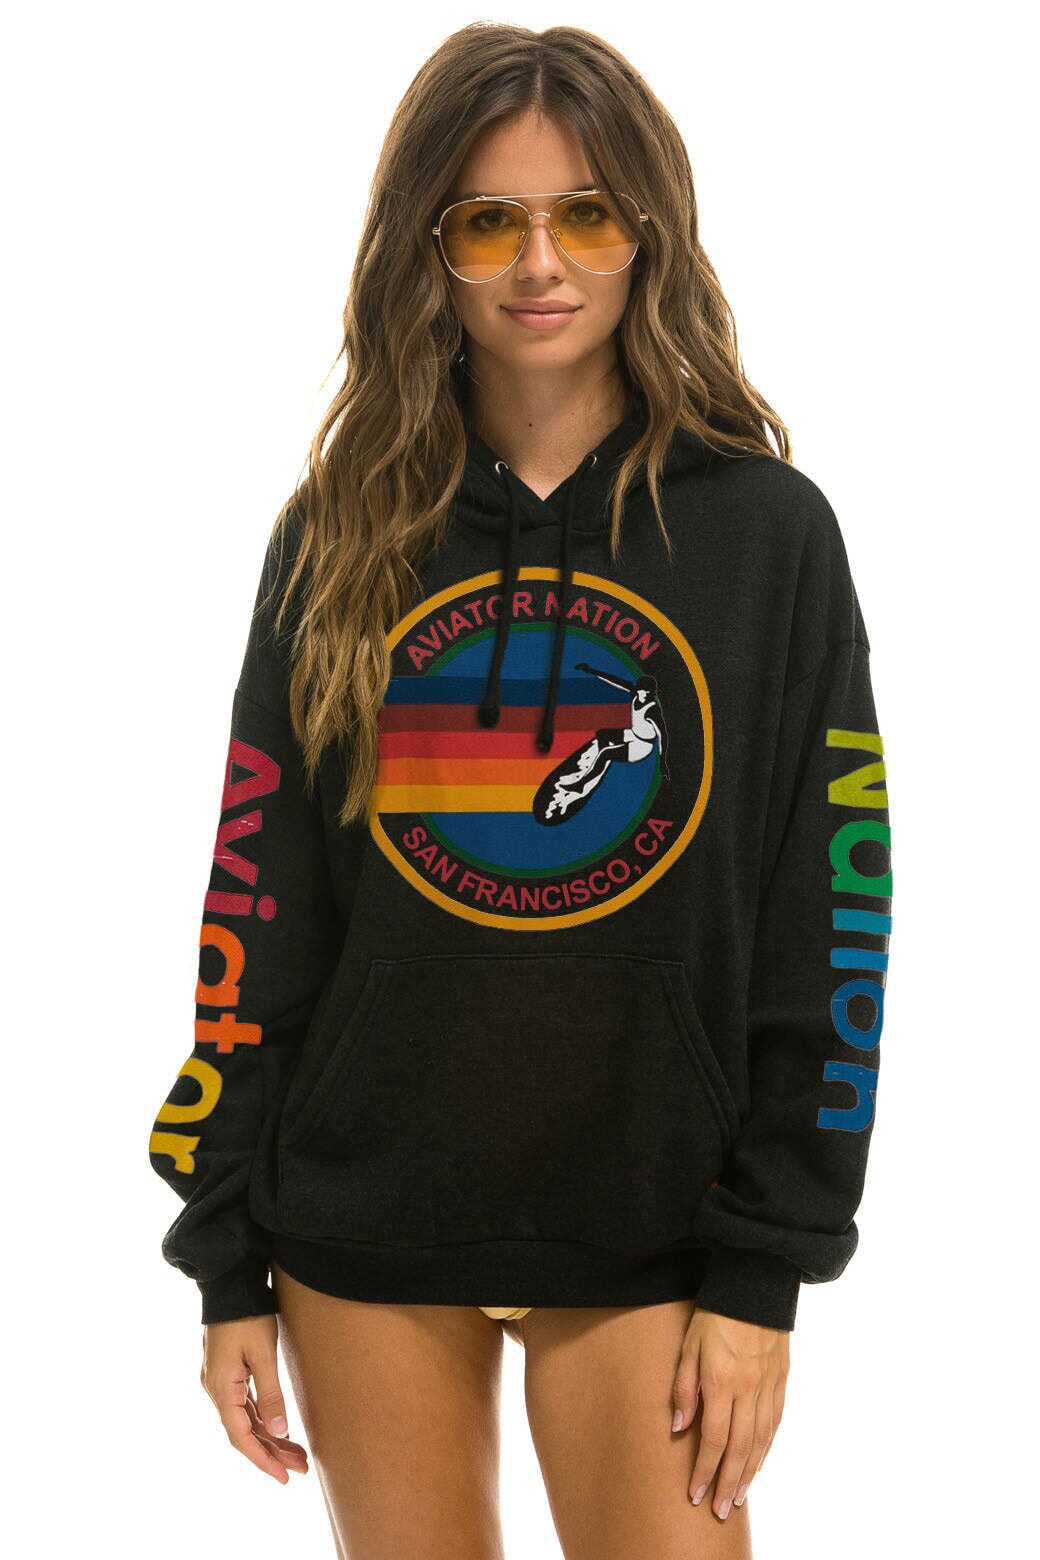 AVIATOR NATION SAN FRANCISCO RELAXED PULLOVER HOODIE - BLACK Hoodie Aviator Nation 